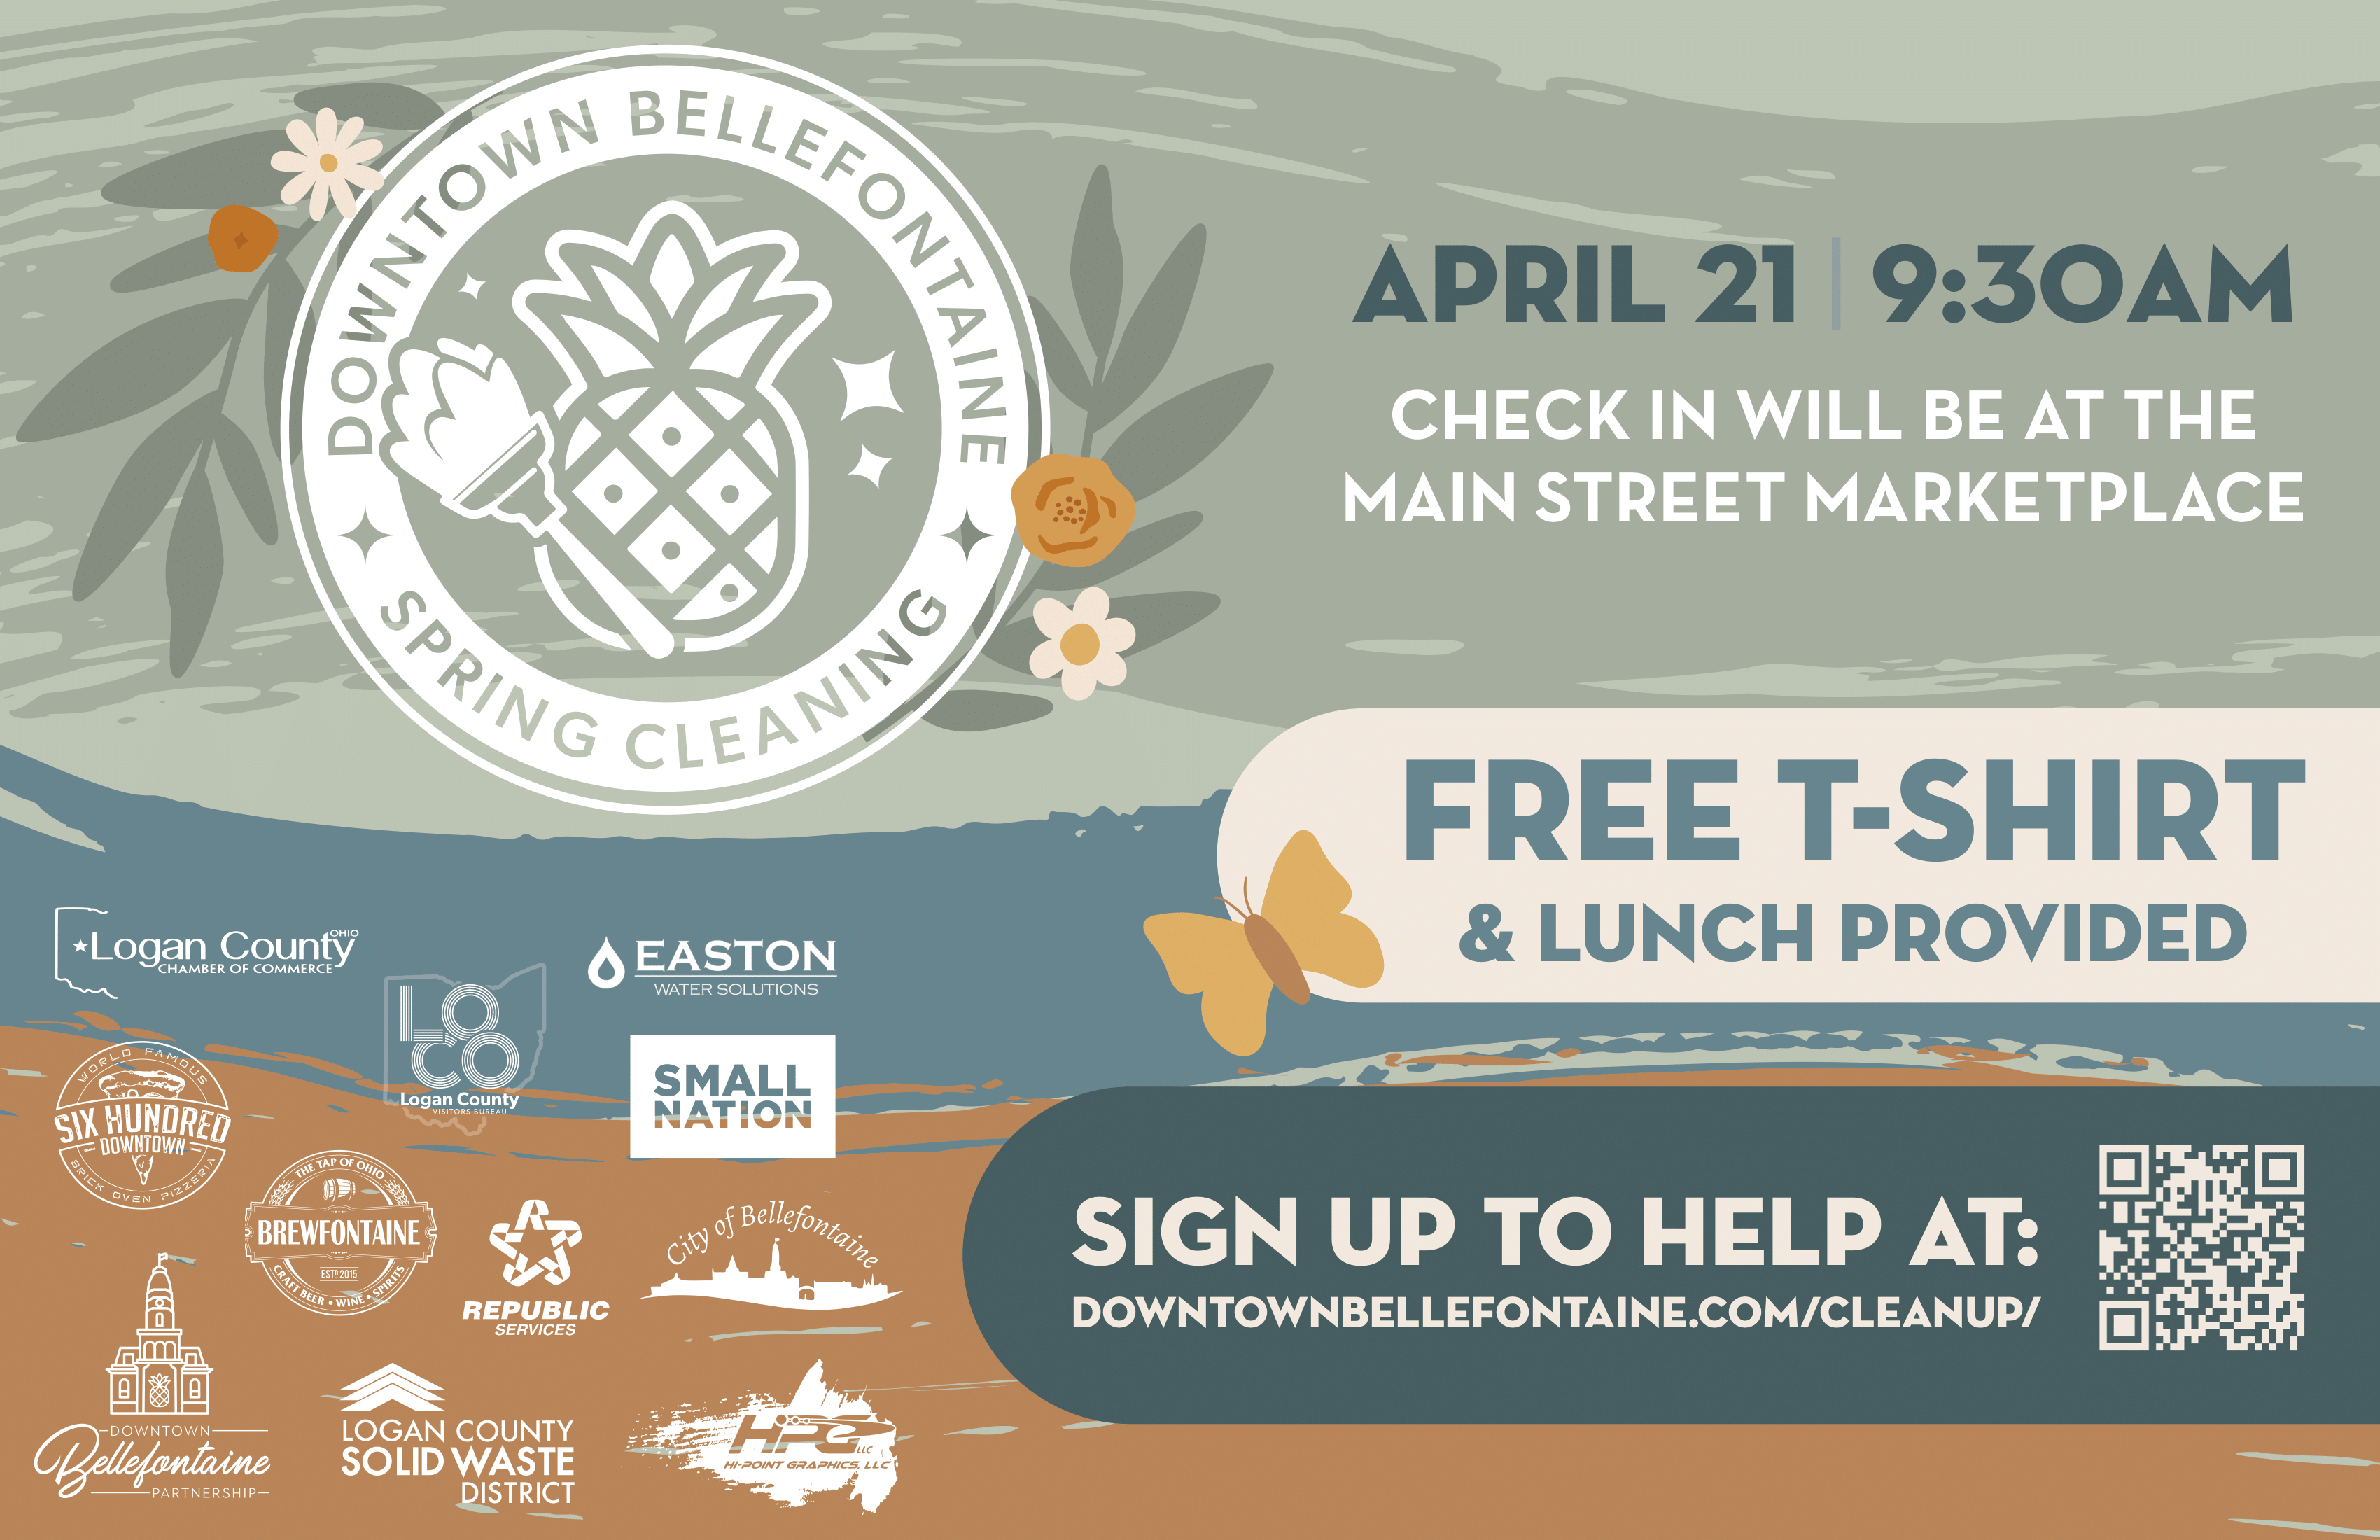 Celebrate Earth Day in Downtown Bellefontaine